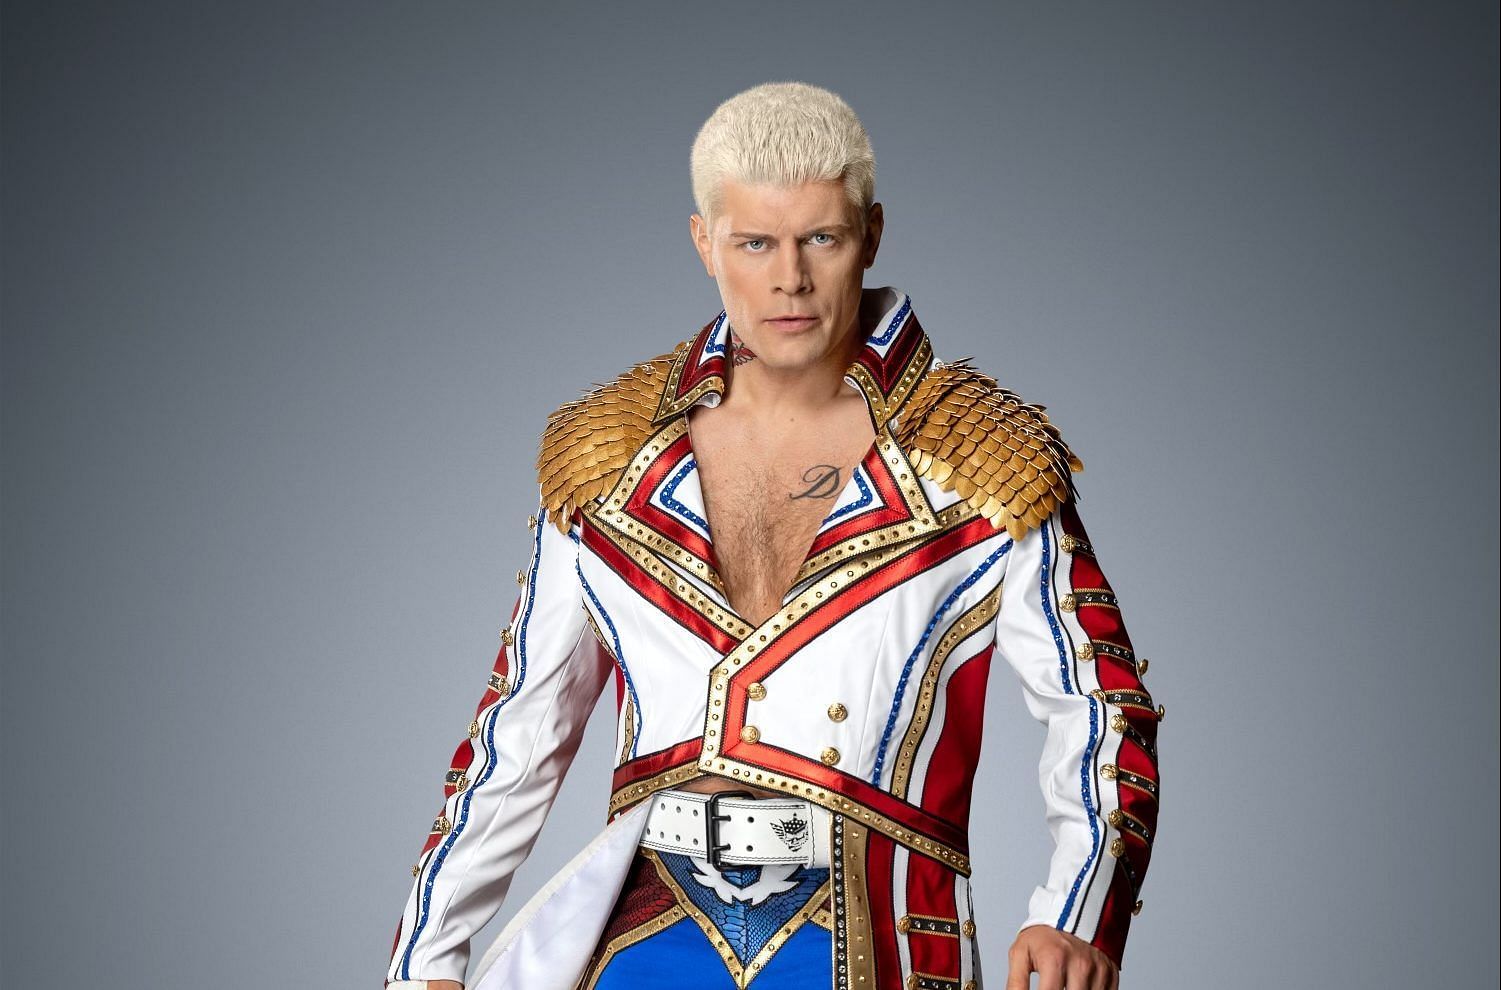 Cody&#039;s brother Dustin Rhodes spoke about the women&#039;s divisions